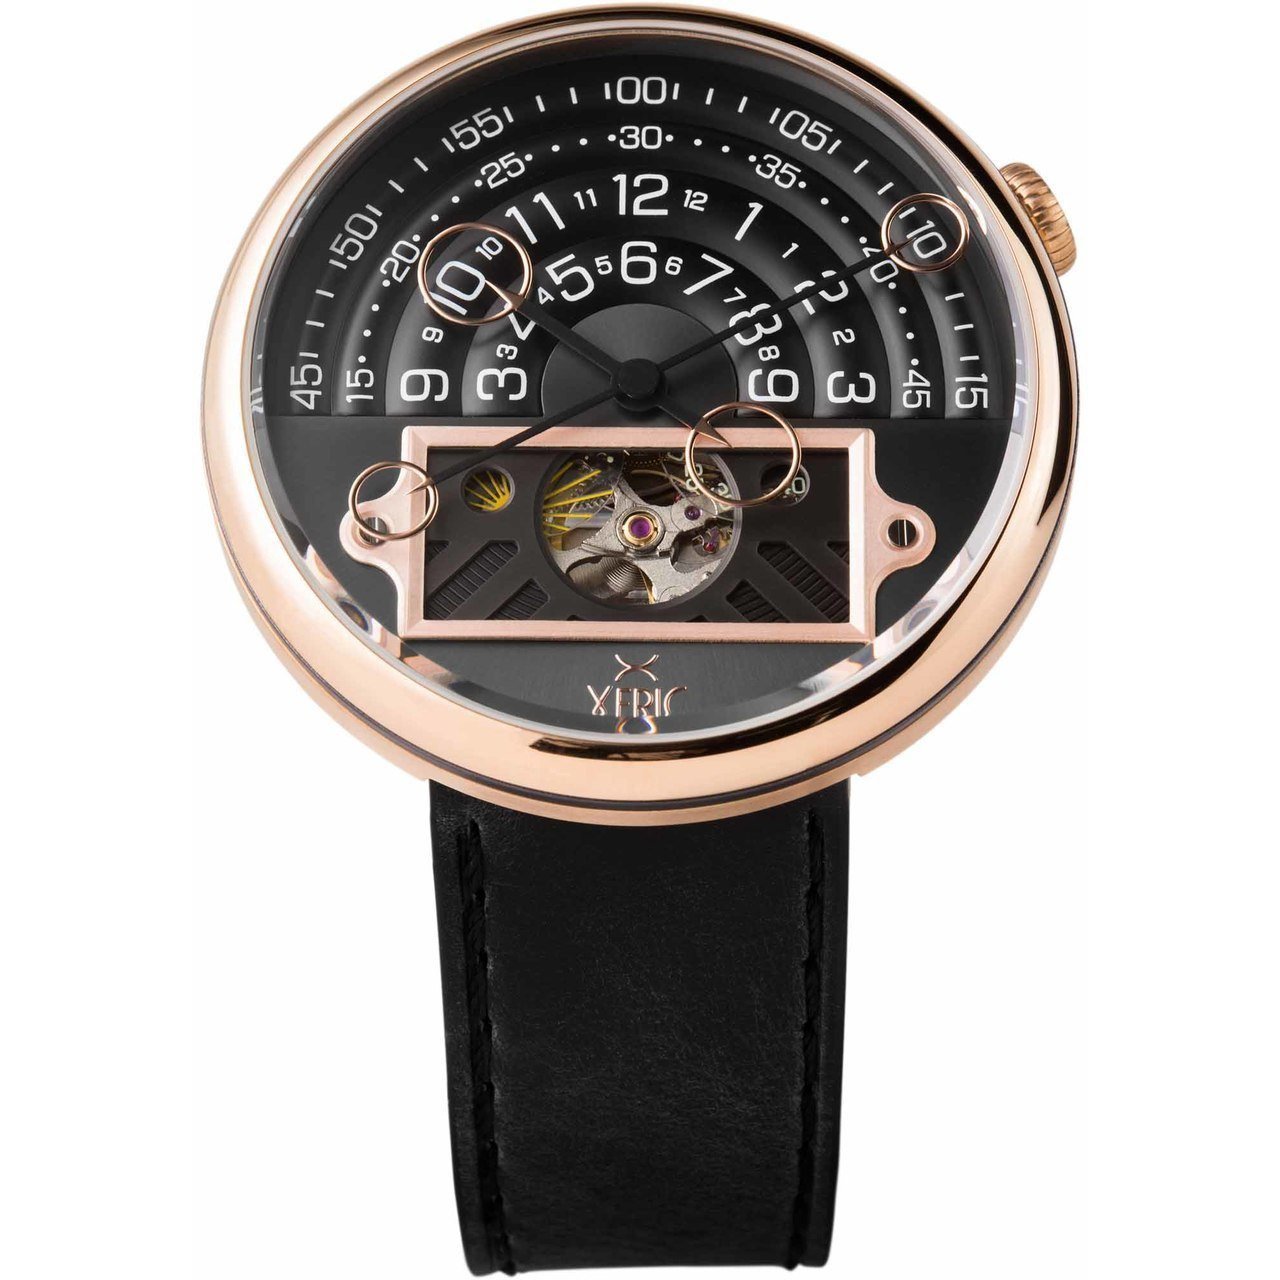 eric Halograph II Automatic Rose Gold Limited Edition